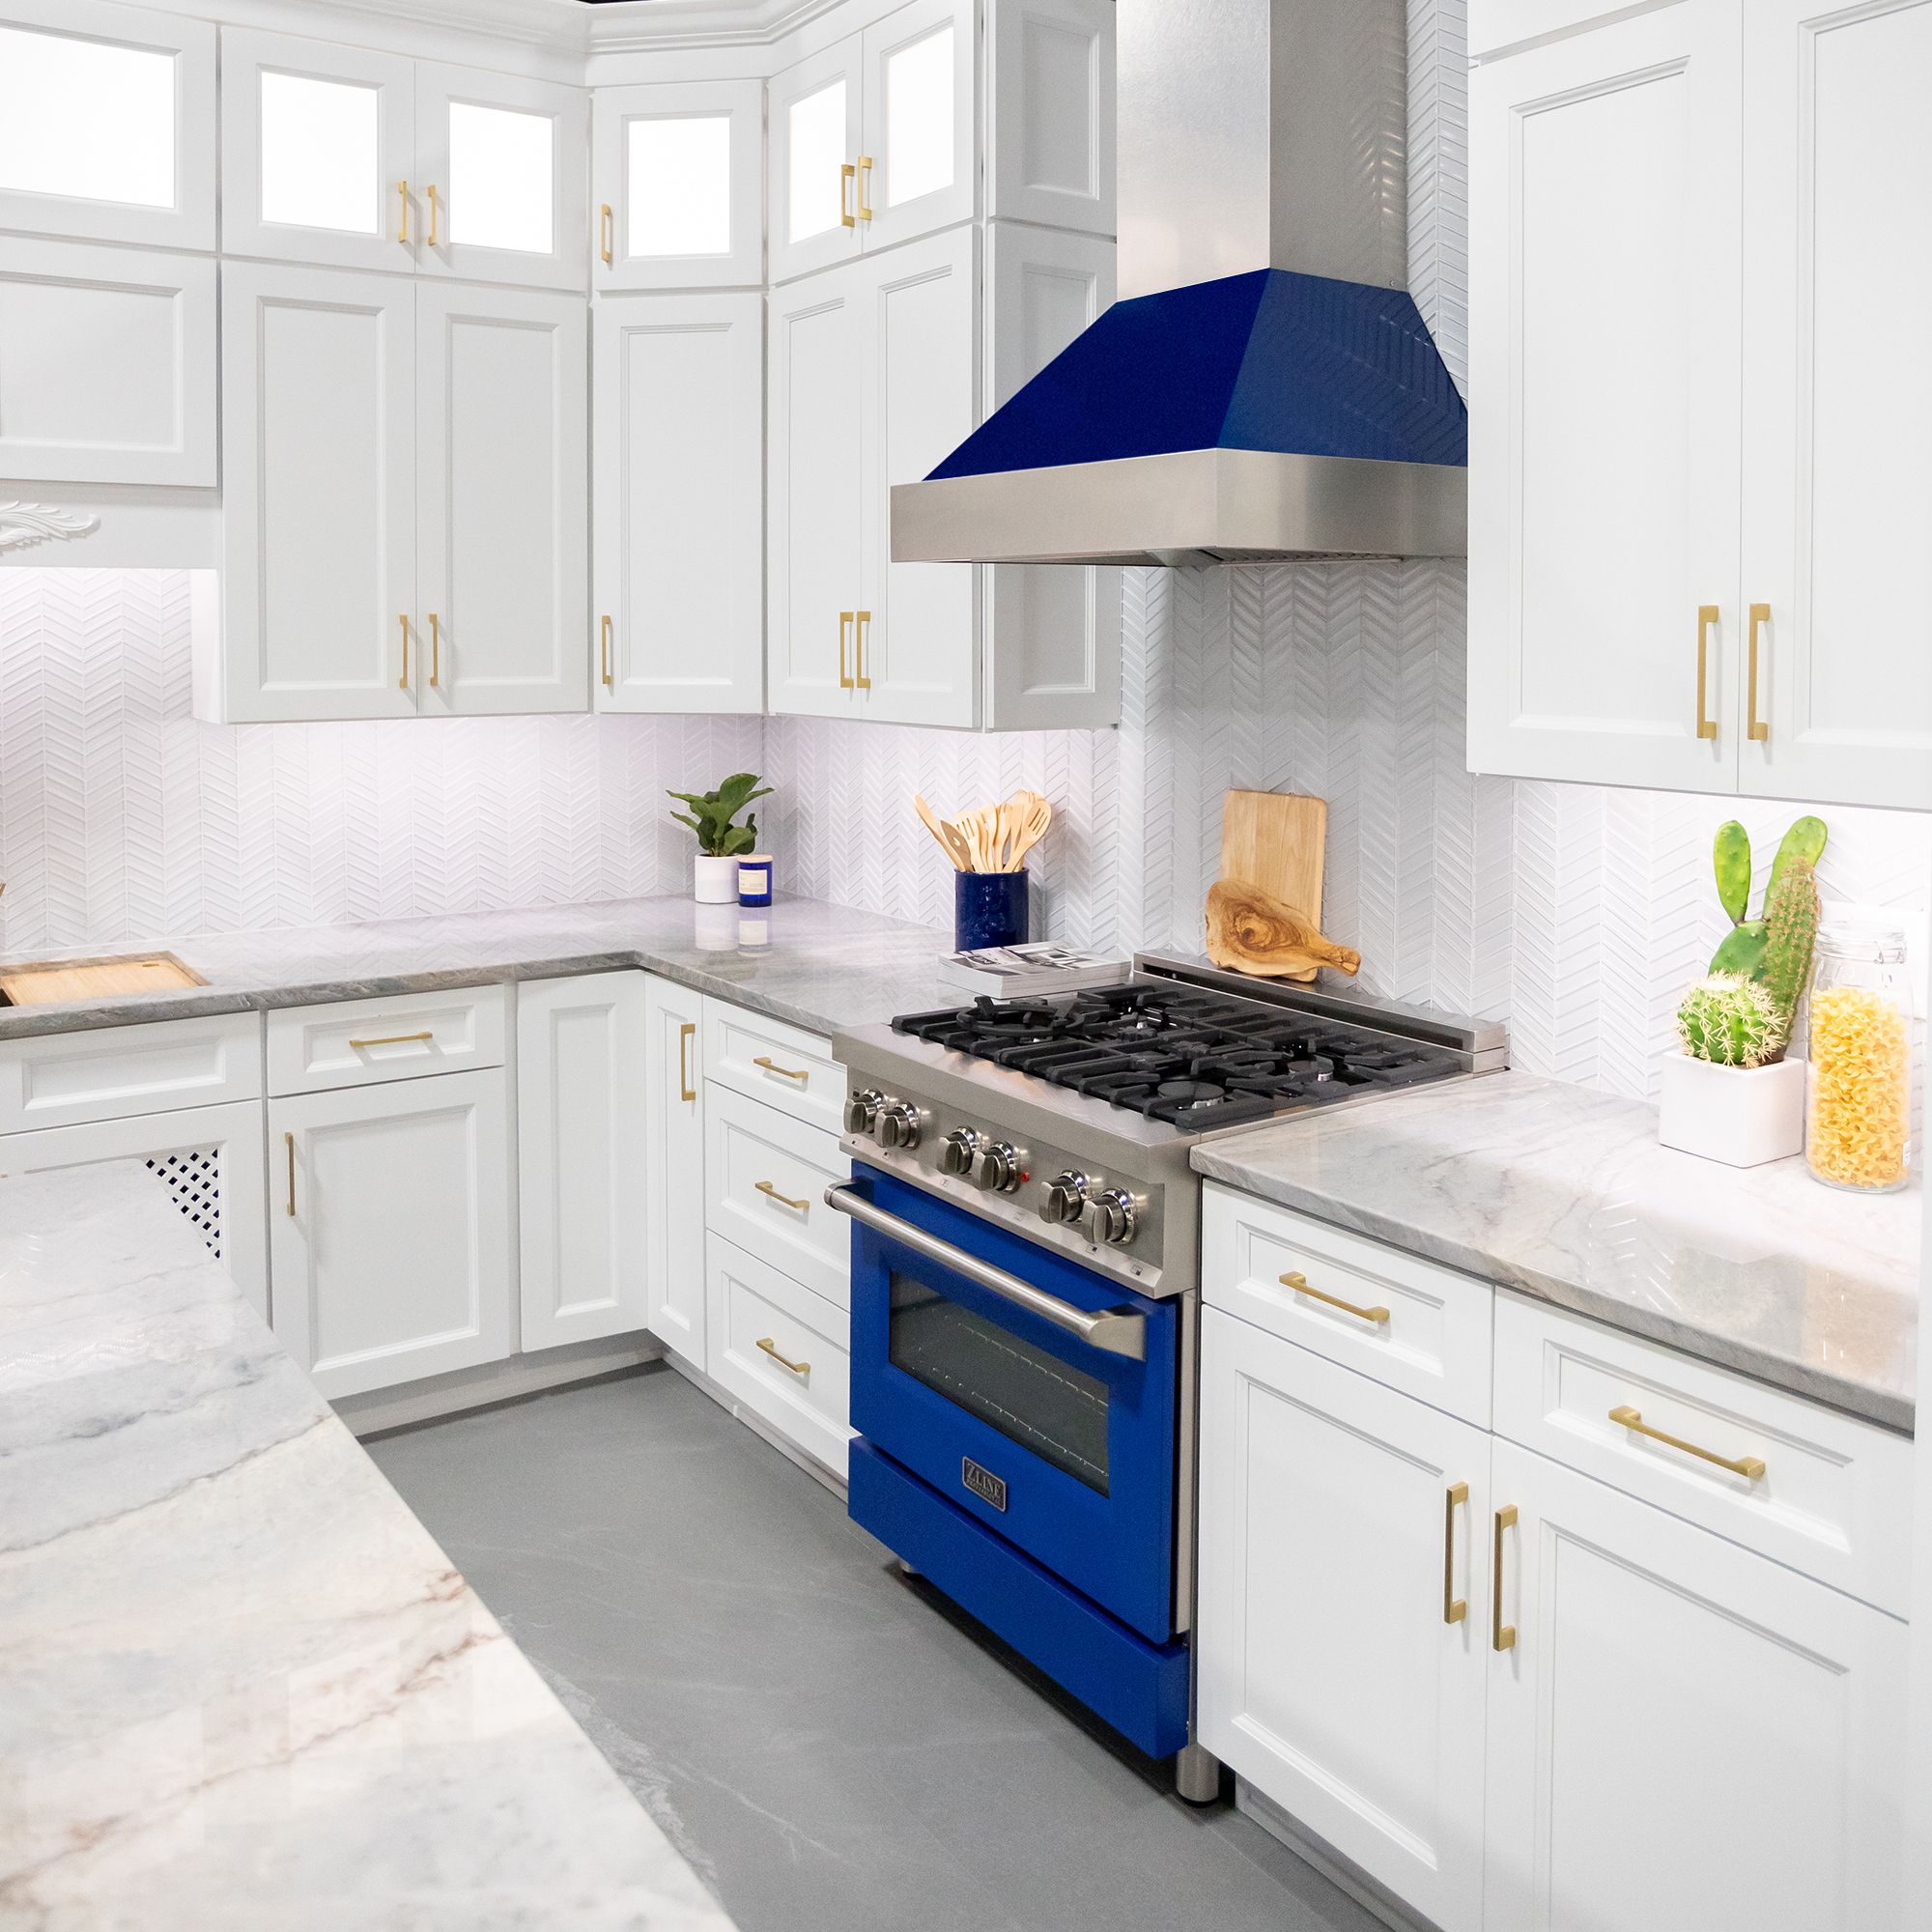 ZLINE Ducted Fingerprint Resistant Stainless Steel Range Hood with Blue Gloss Shell (8654BG) with matching blue gloss range in a white cottage-style kitchen from side.